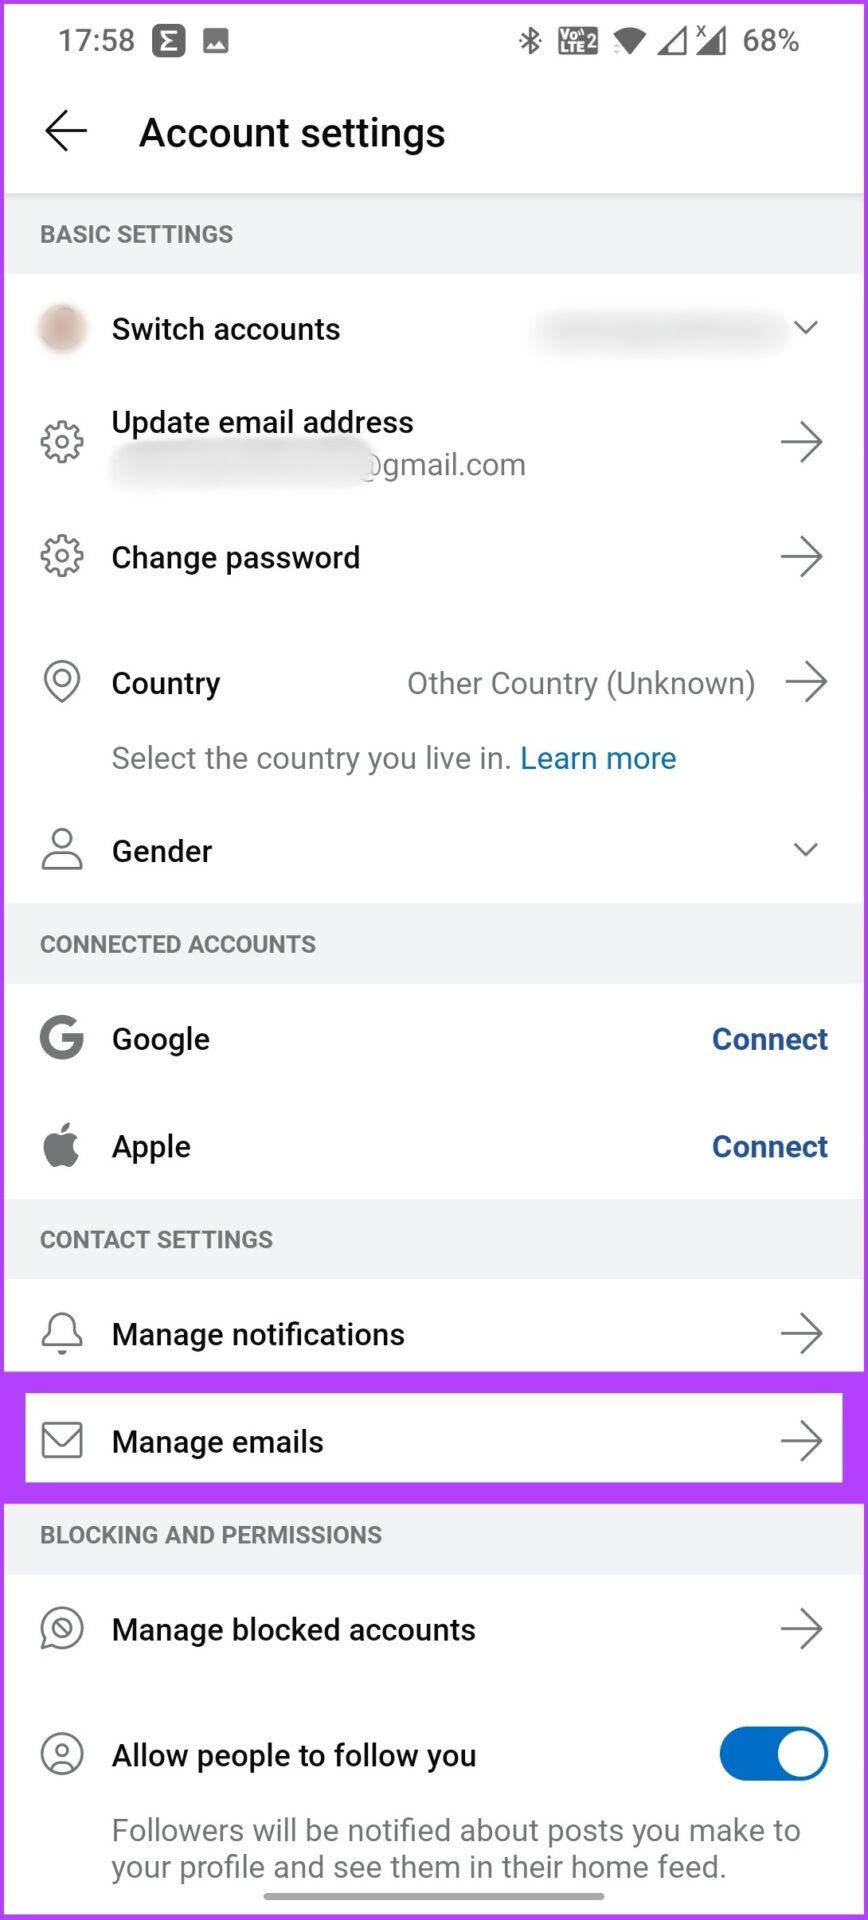 Tap Manage email under Contact Settings